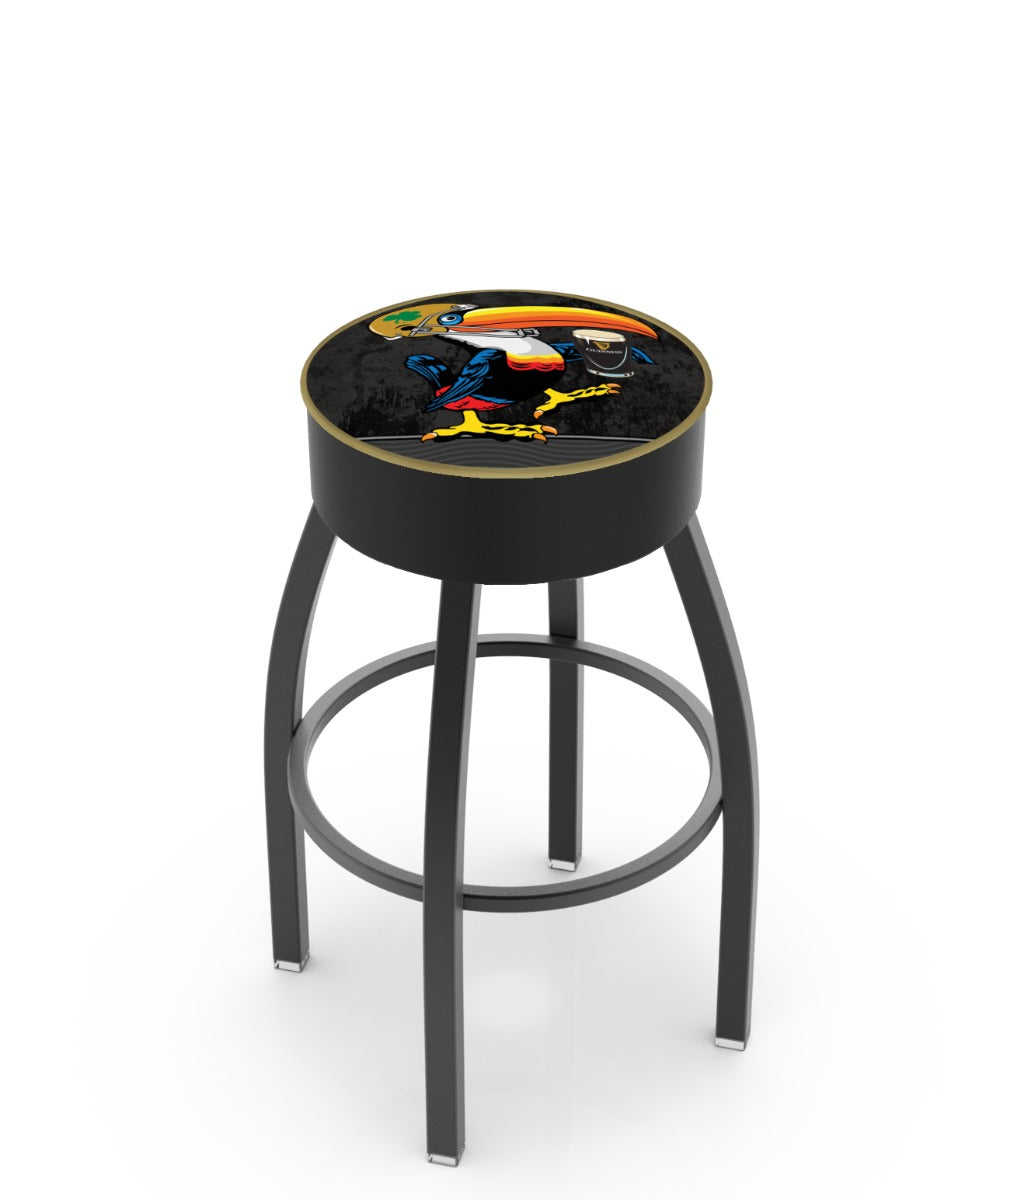 A black Notre Dame Toucan Swivel bar stool with gold trimming and a parrot on it. (Brand: Guinness)